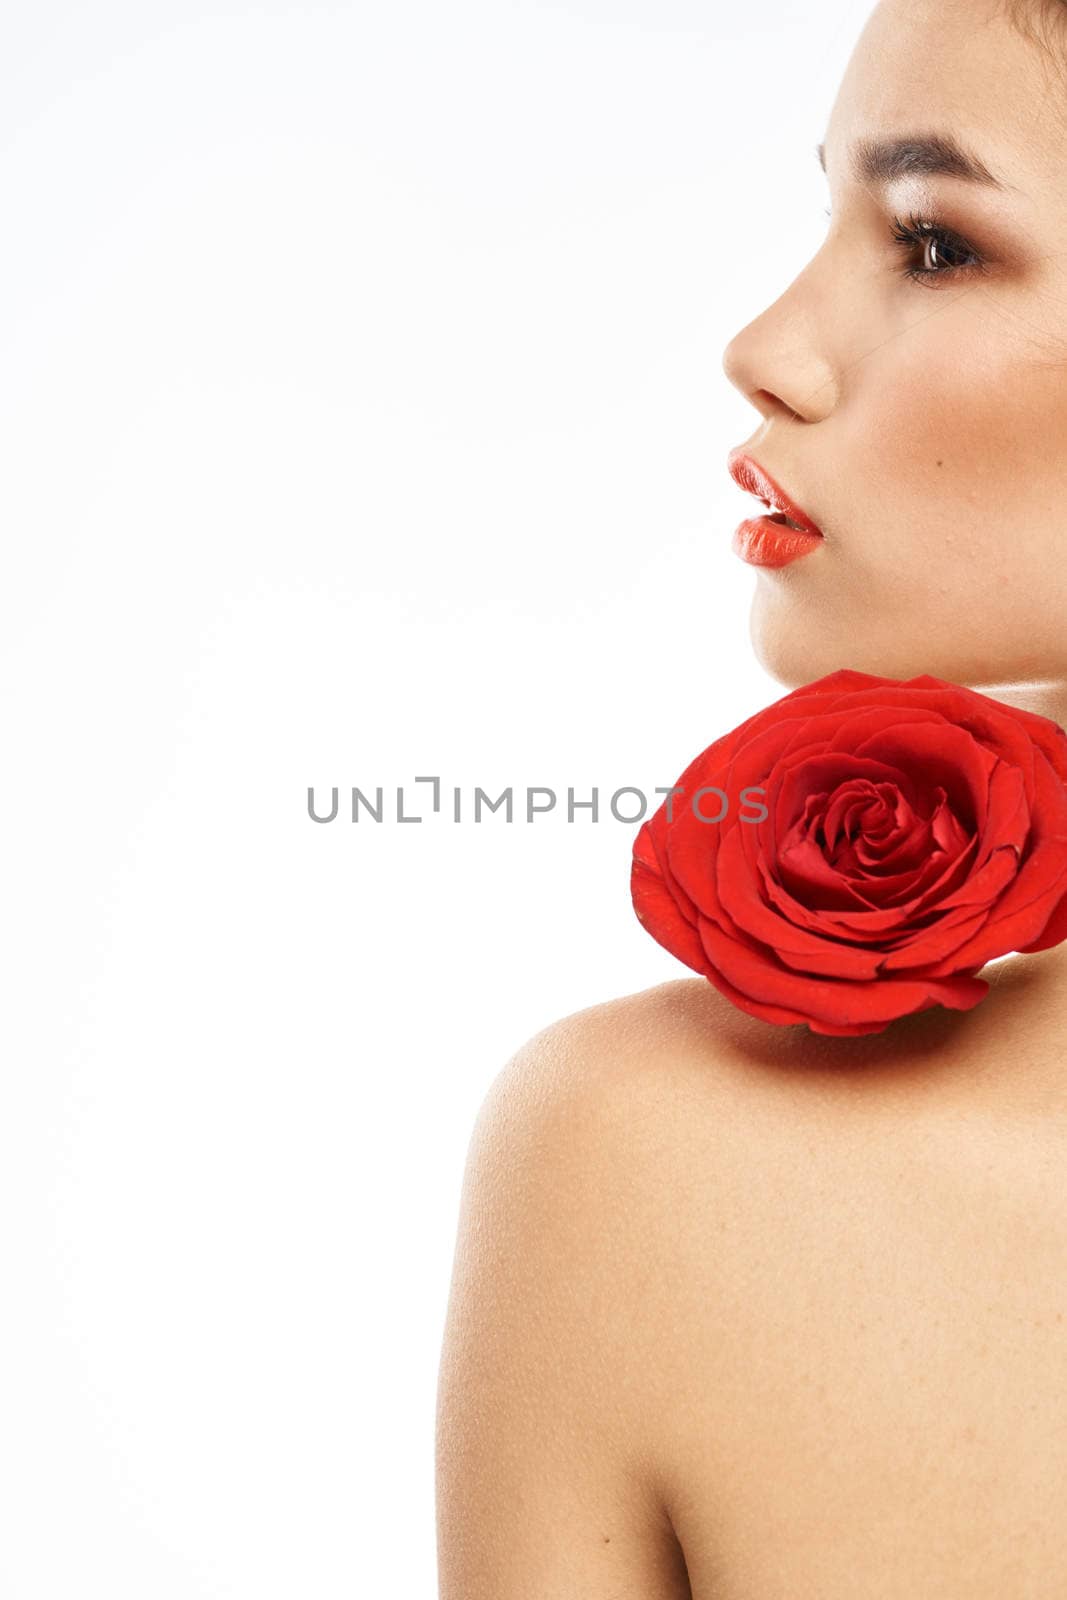 Portrait of woman with red rose naked shoulders Make-up on brunette face by SHOTPRIME